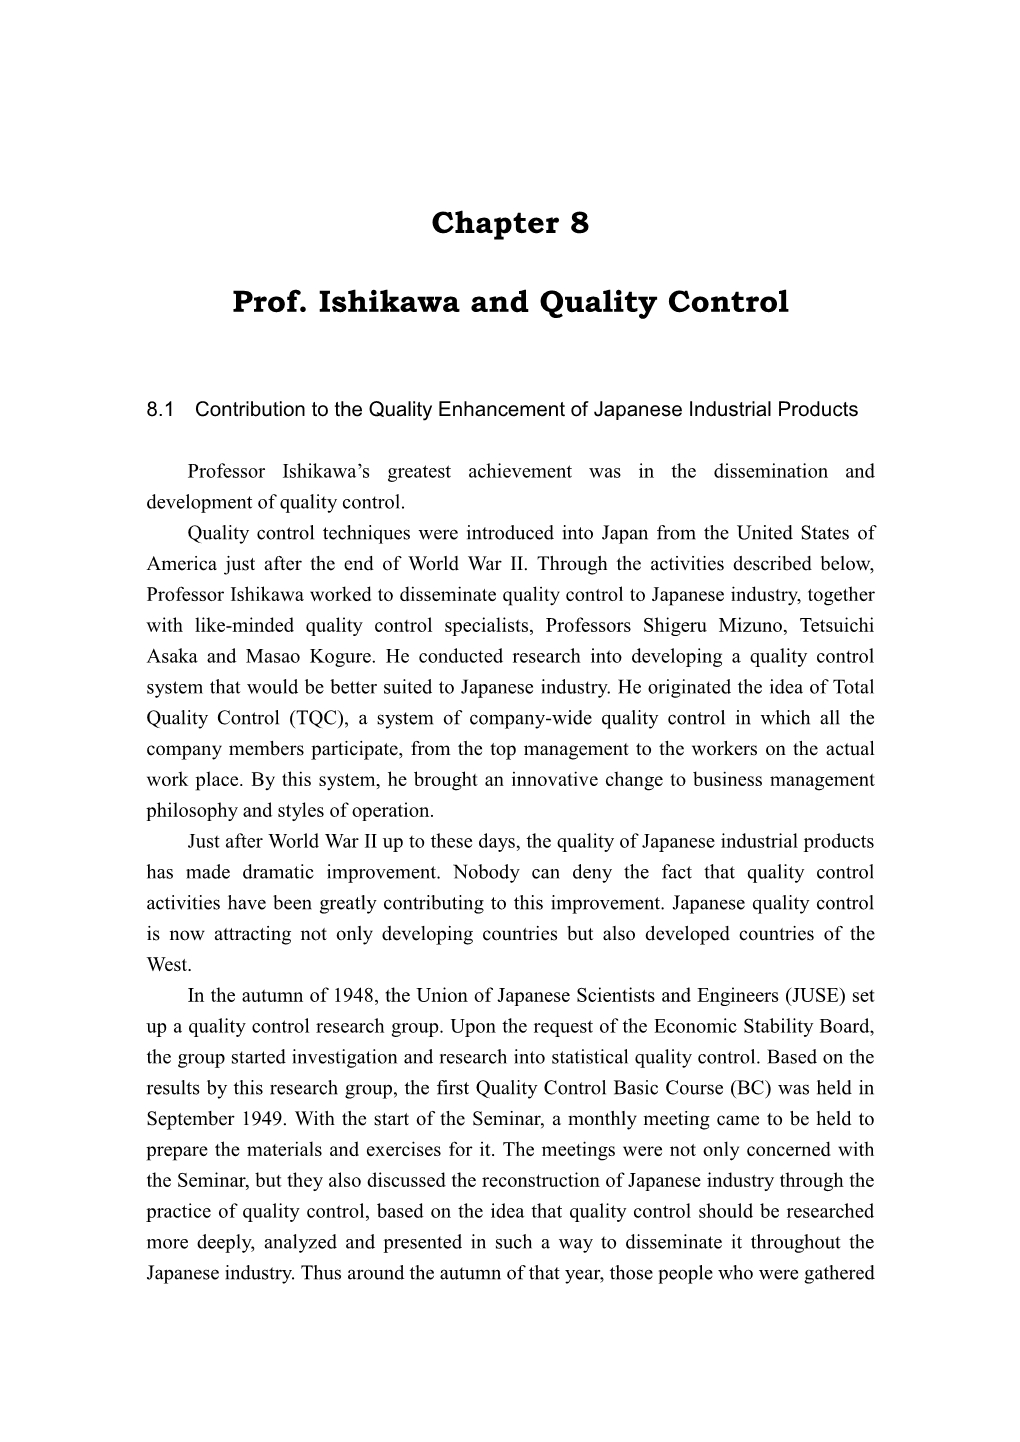 Chapter 8 Prof. Ishikawa and Quality Control Award Such Companies That Achieved Outstanding Performance in Quality Control